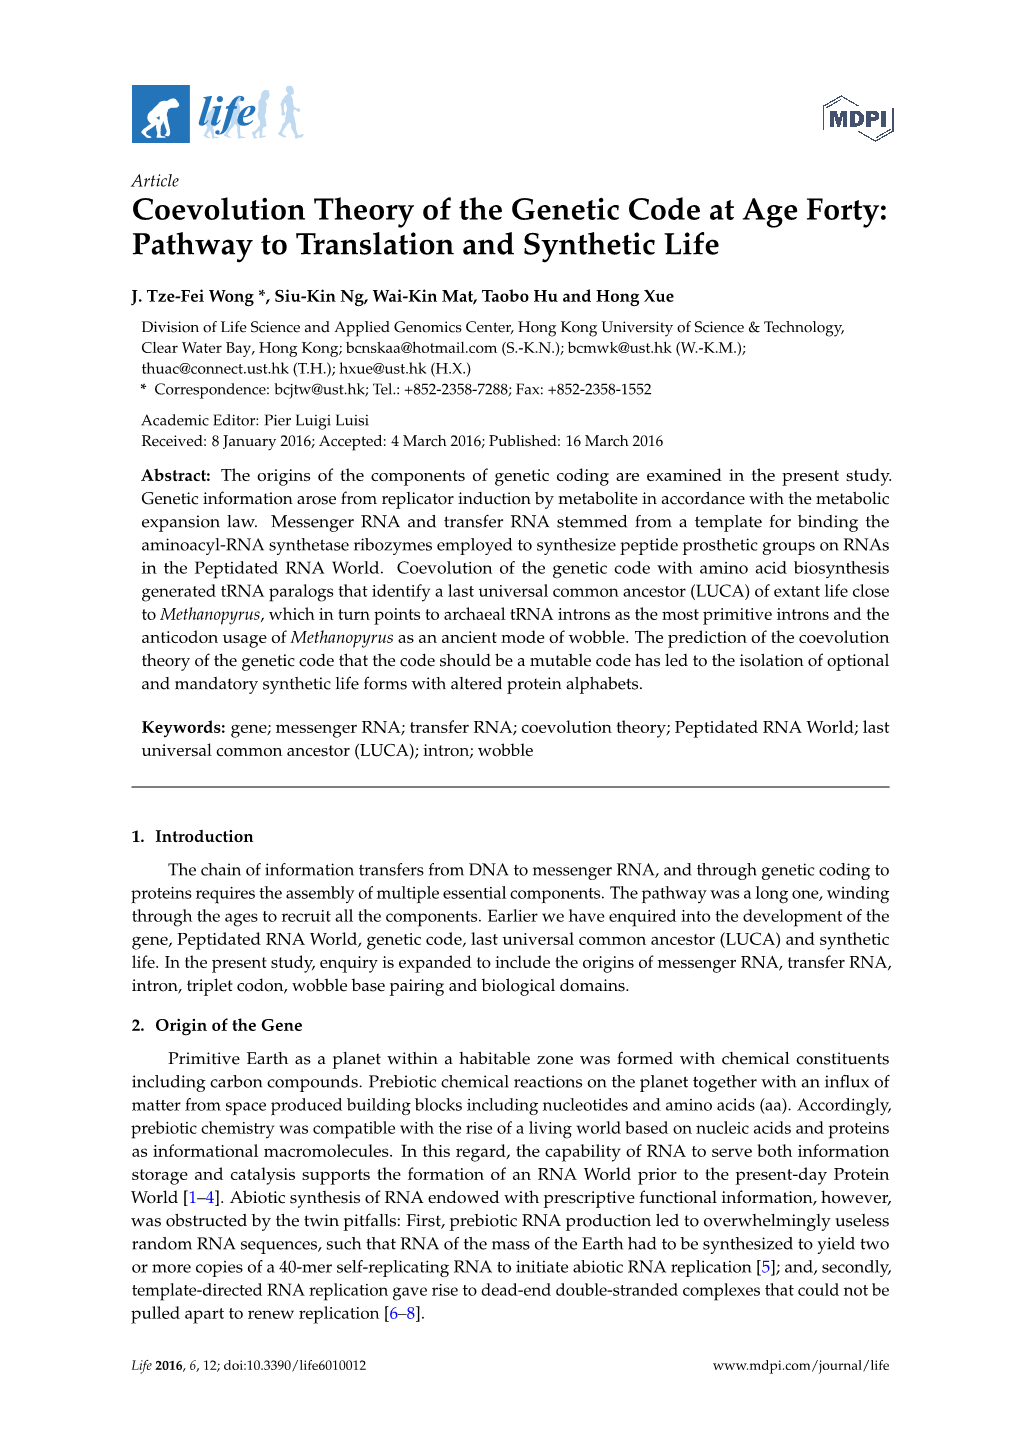 Coevolution Theory of the Genetic Code at Age Forty: Pathway to Translation and Synthetic Life